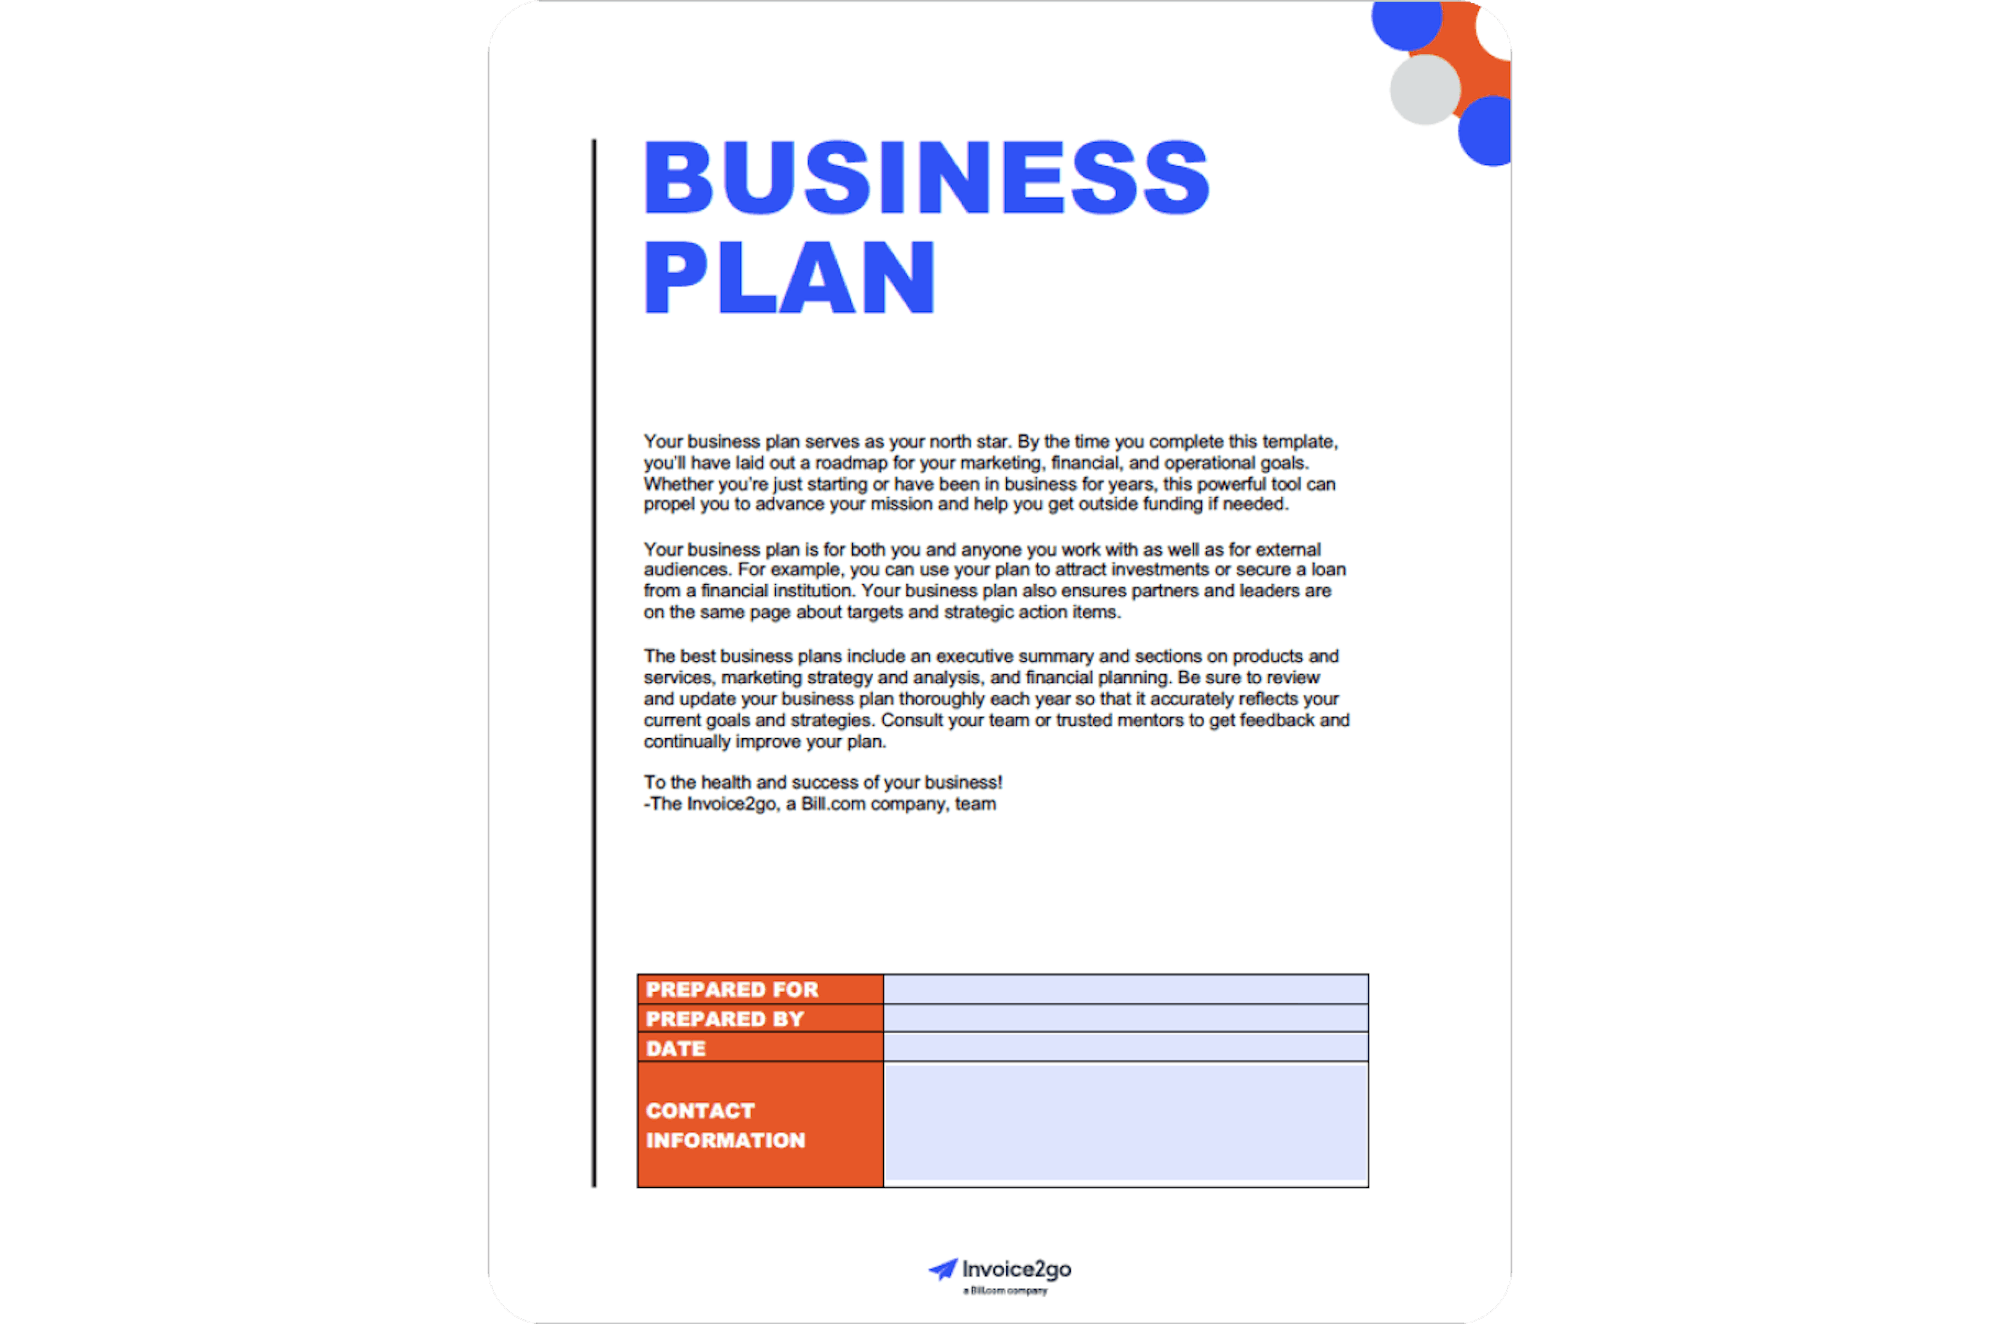 free-downloadable-business-plan-templates-invoice2go